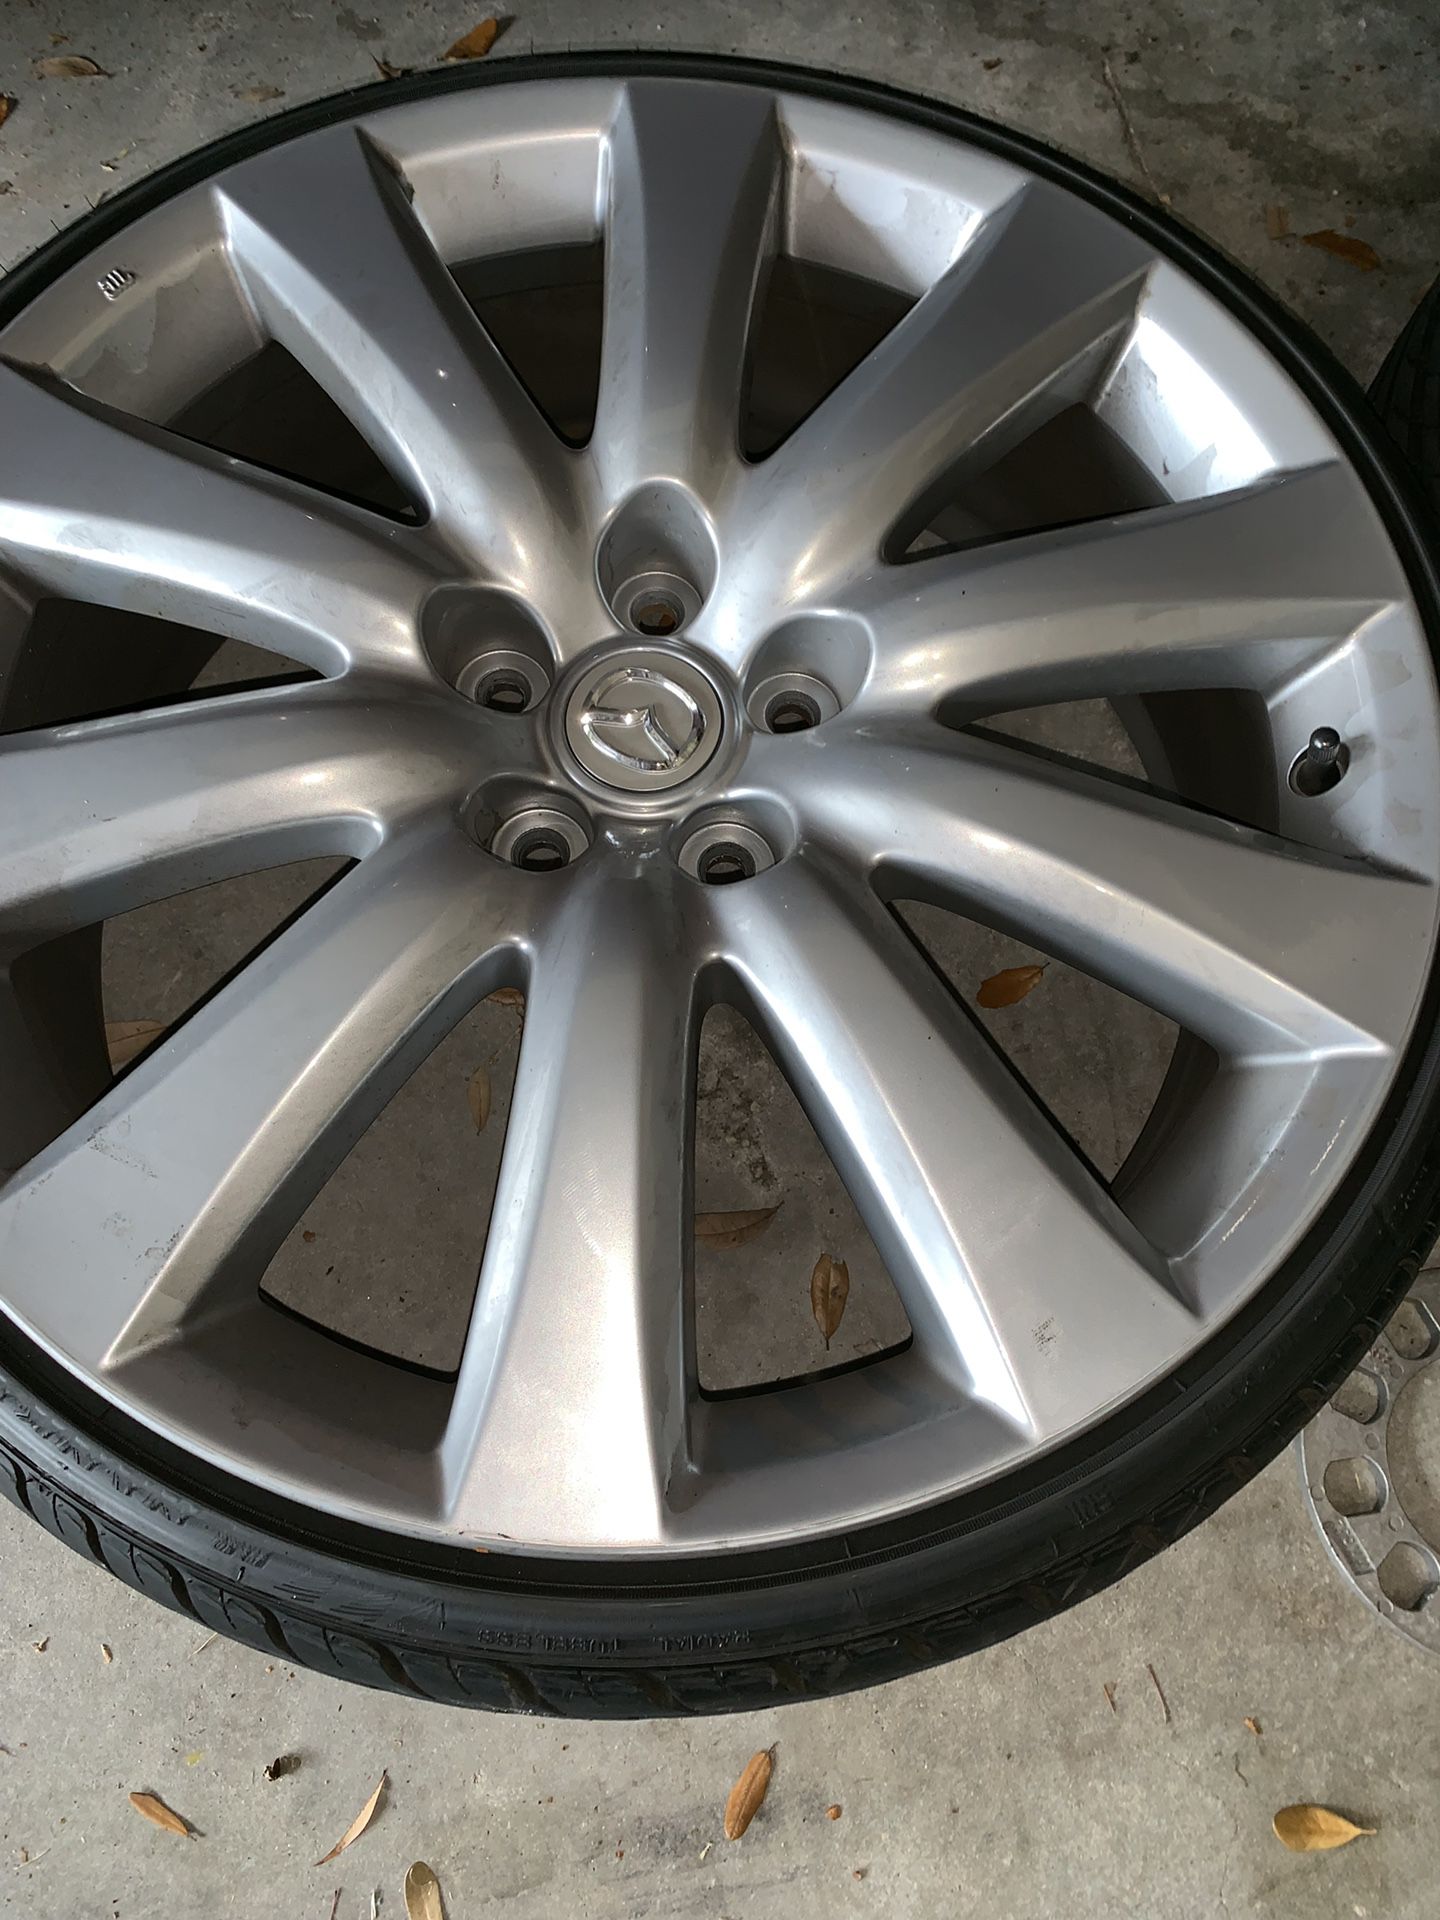 Mazda CX-9 20” rims for sale tires are almost new asking 1,000 or best offer